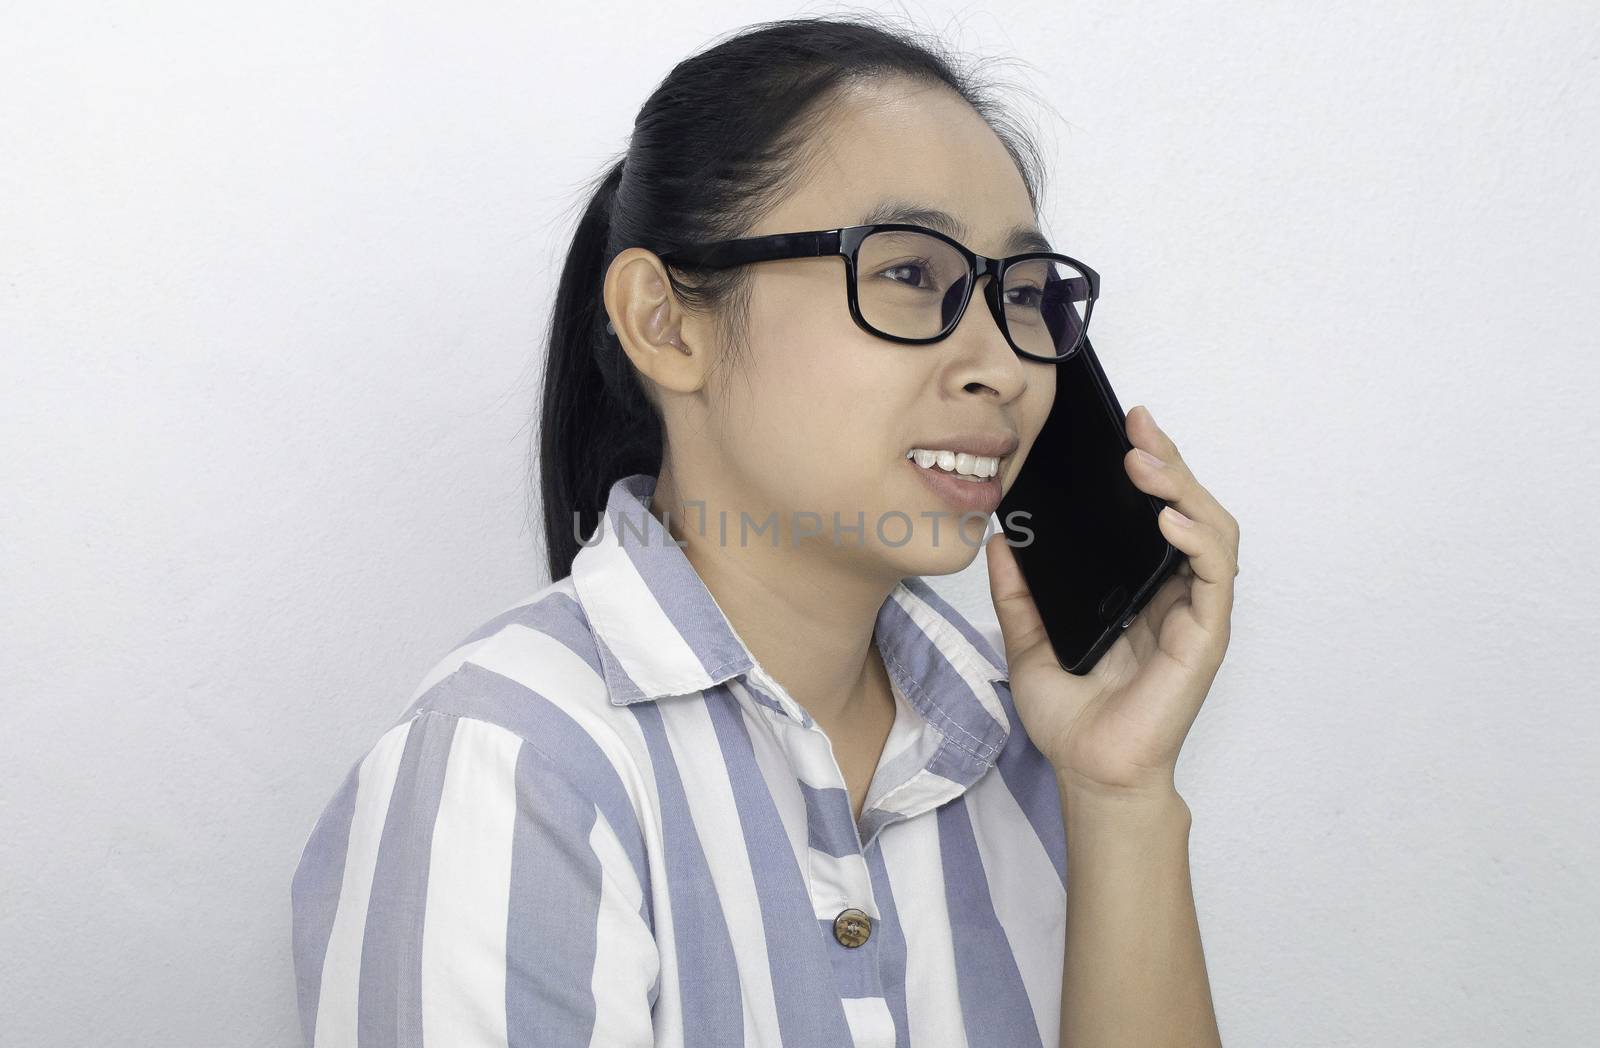 Cheerful Business Asian young woman talking on the phone over white background, Happy and smiling face.